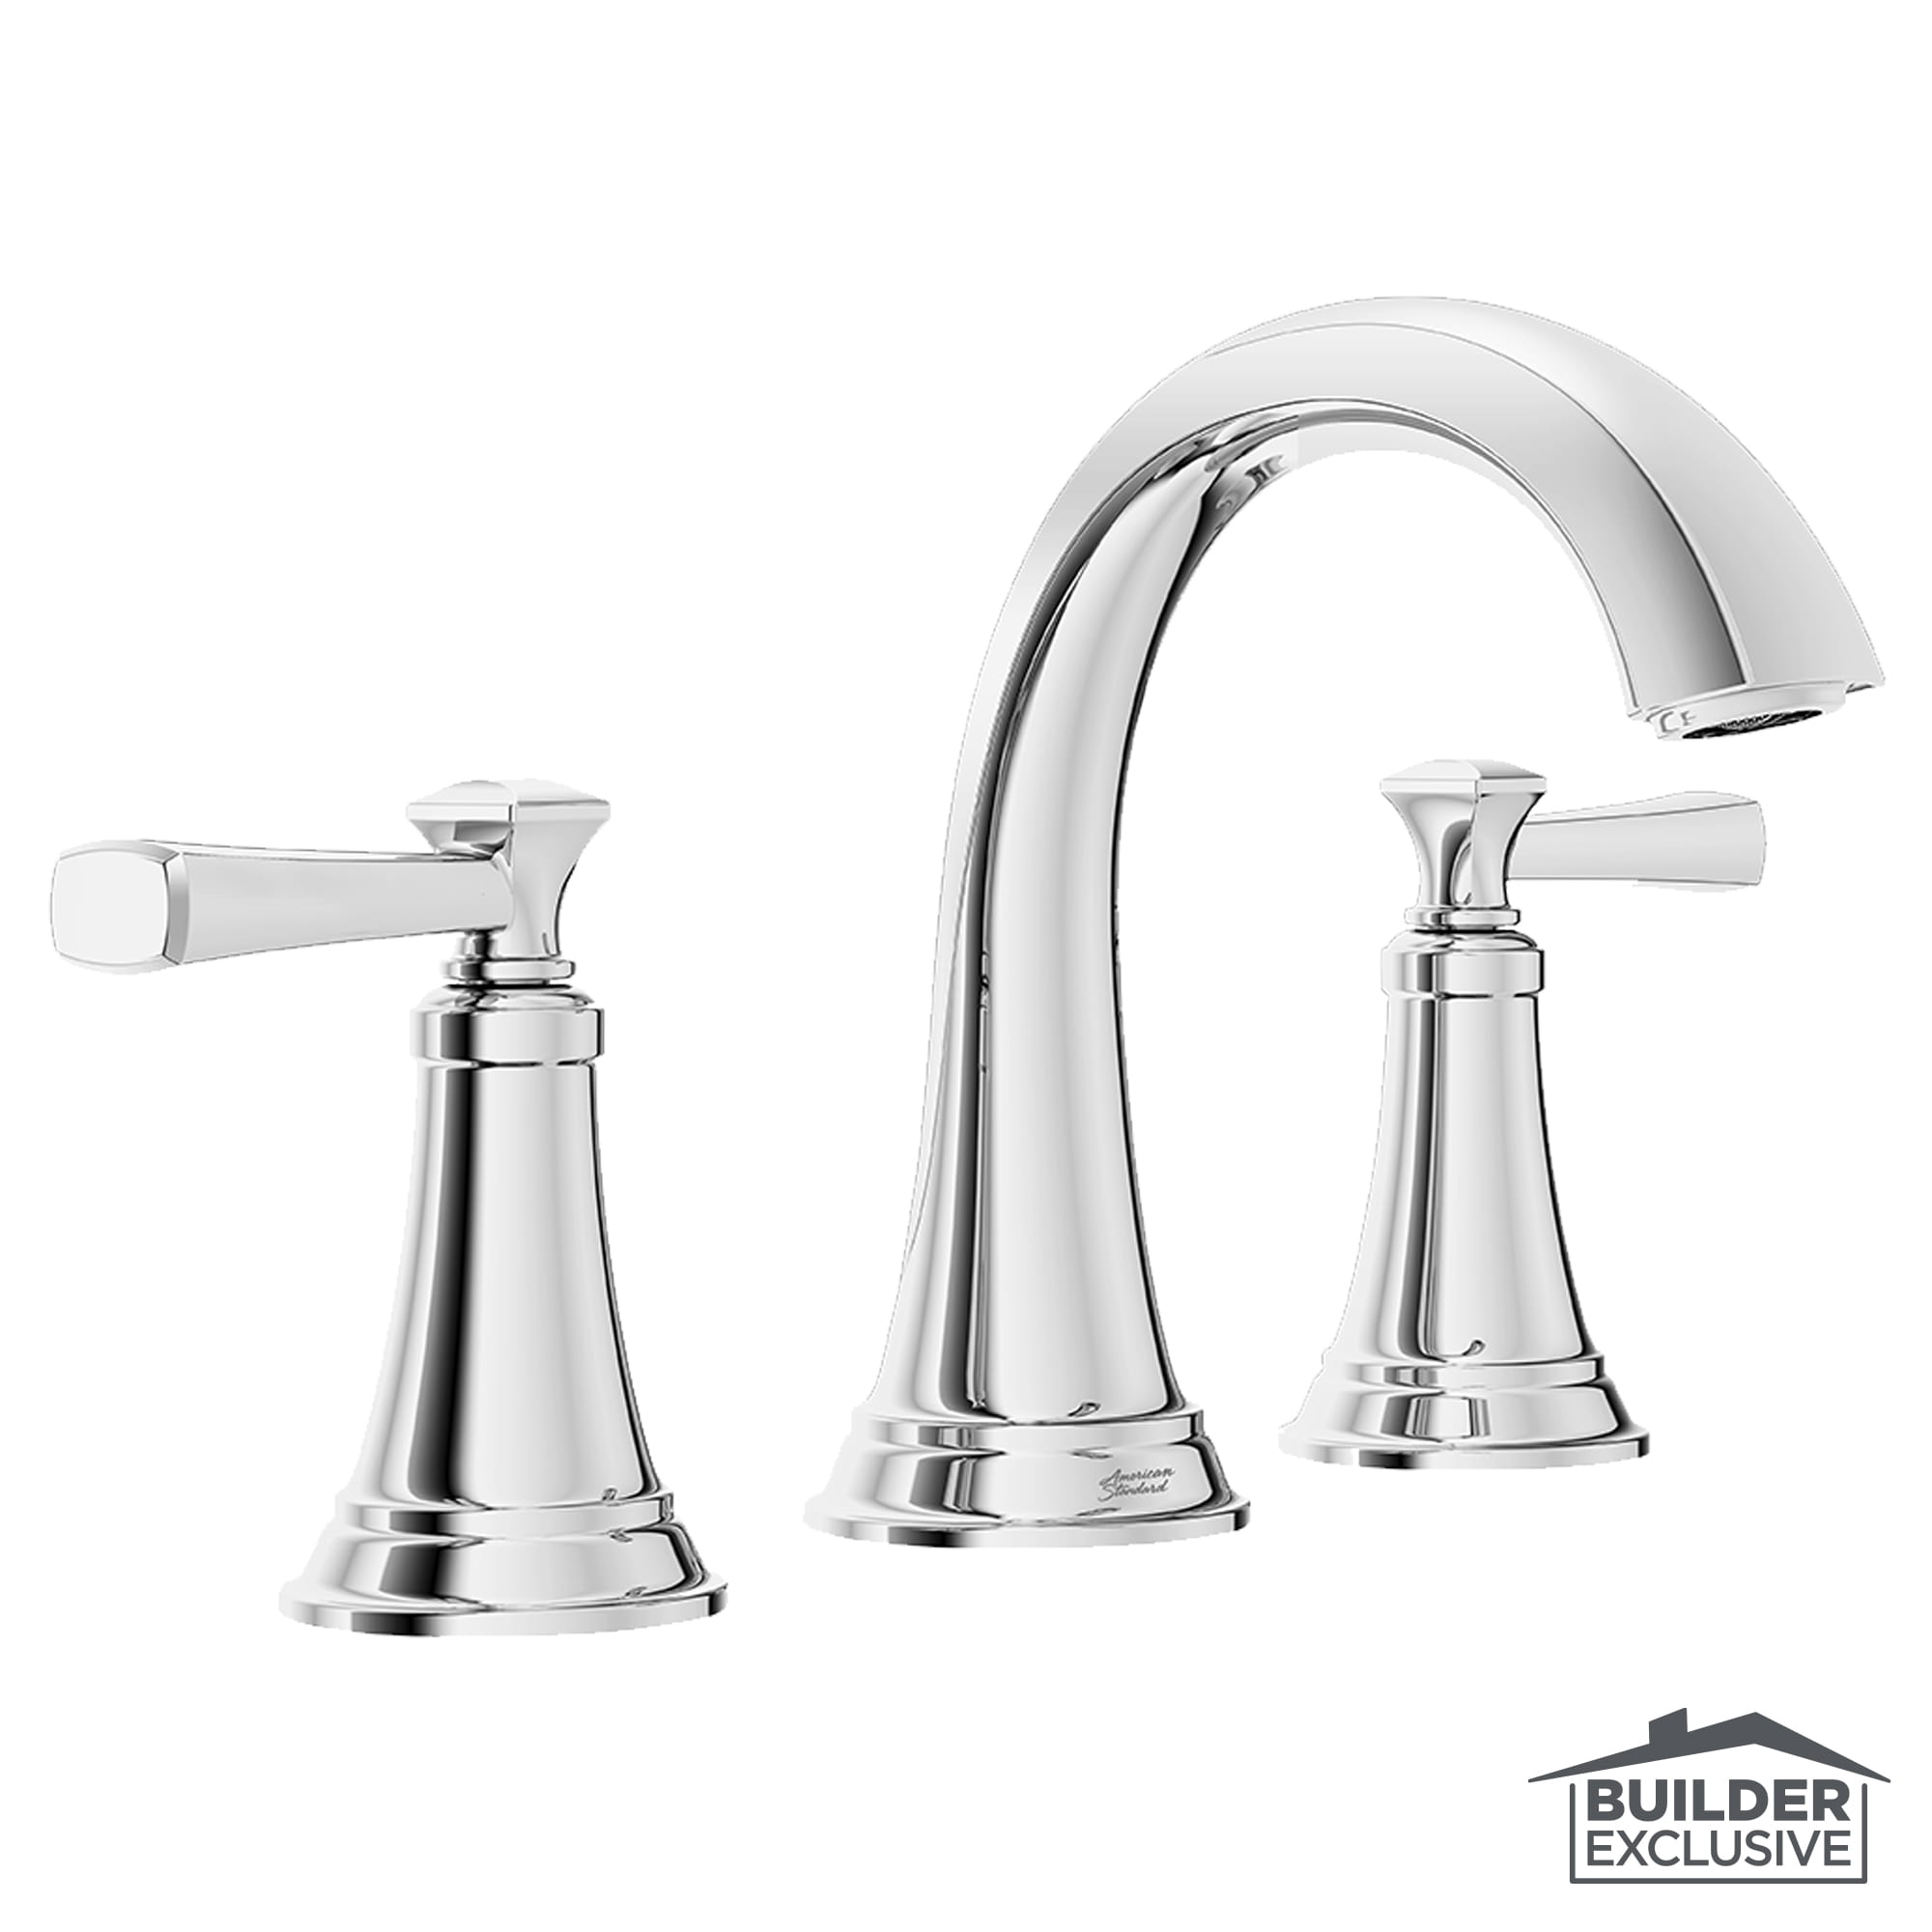 Glenmere 8-Inch Widespread 2-Handle Bathroom Faucet with Metal Drain